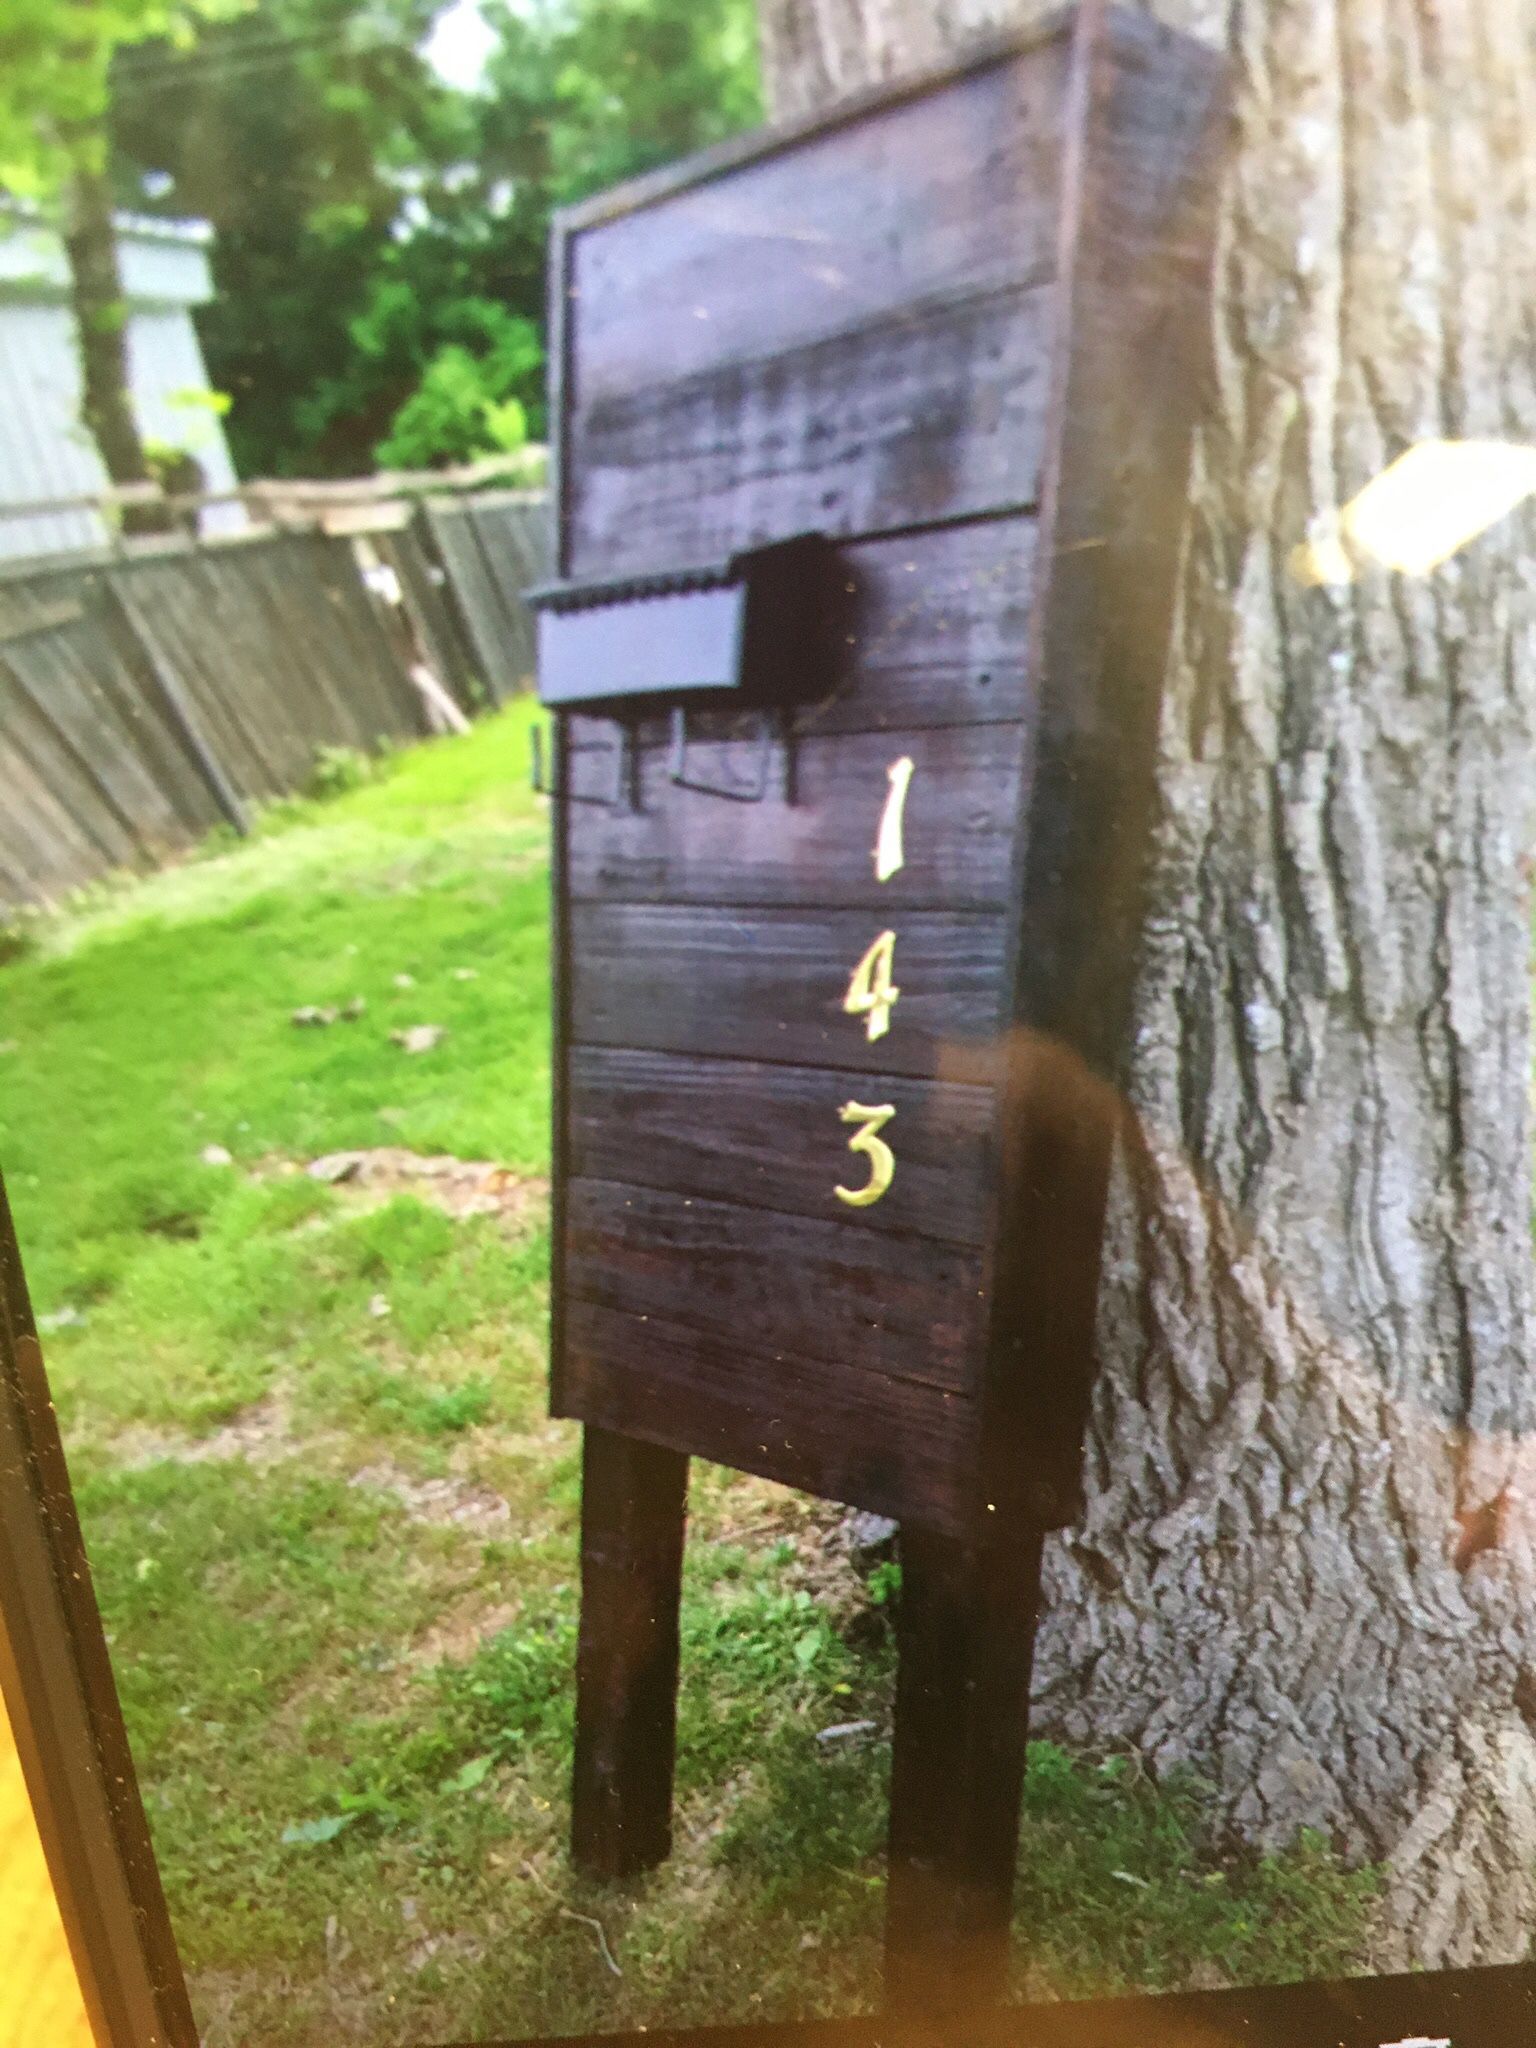 Handmade Yard Mailbox.      IF YOU SEE THIS POST IT IS AVAILABLE.       Read All Info.  